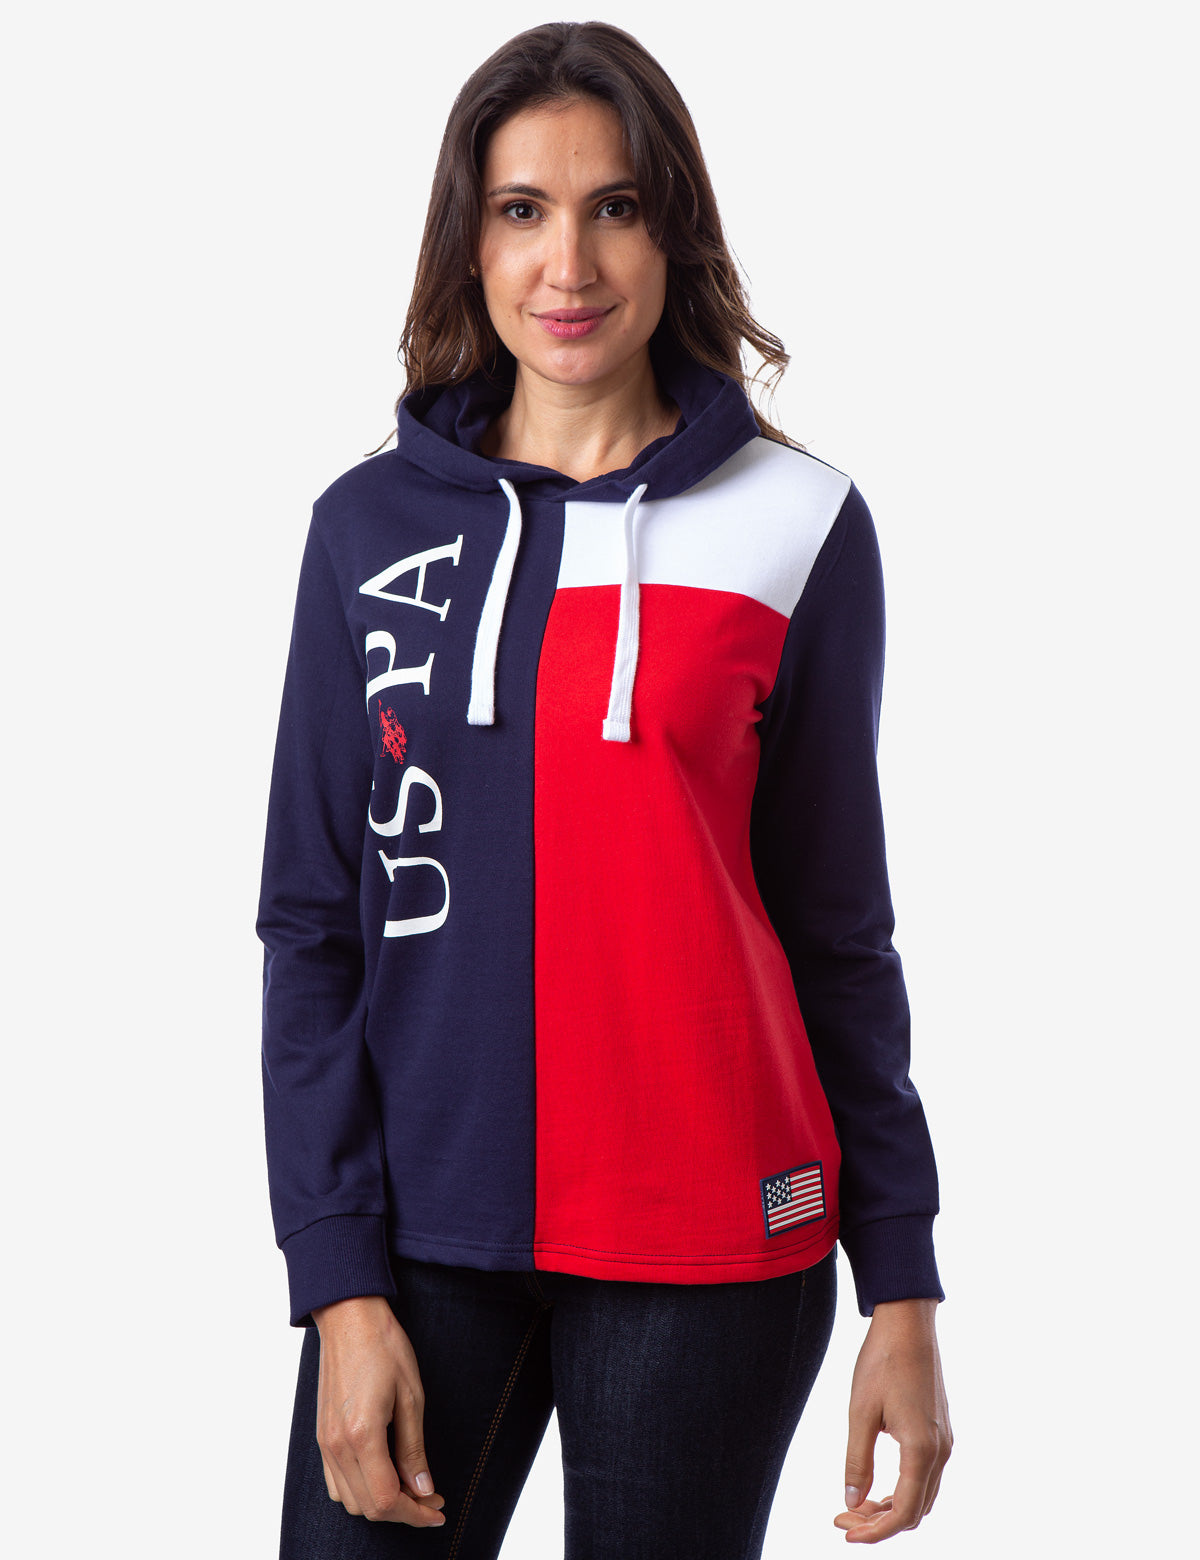 red polo hoodie women's